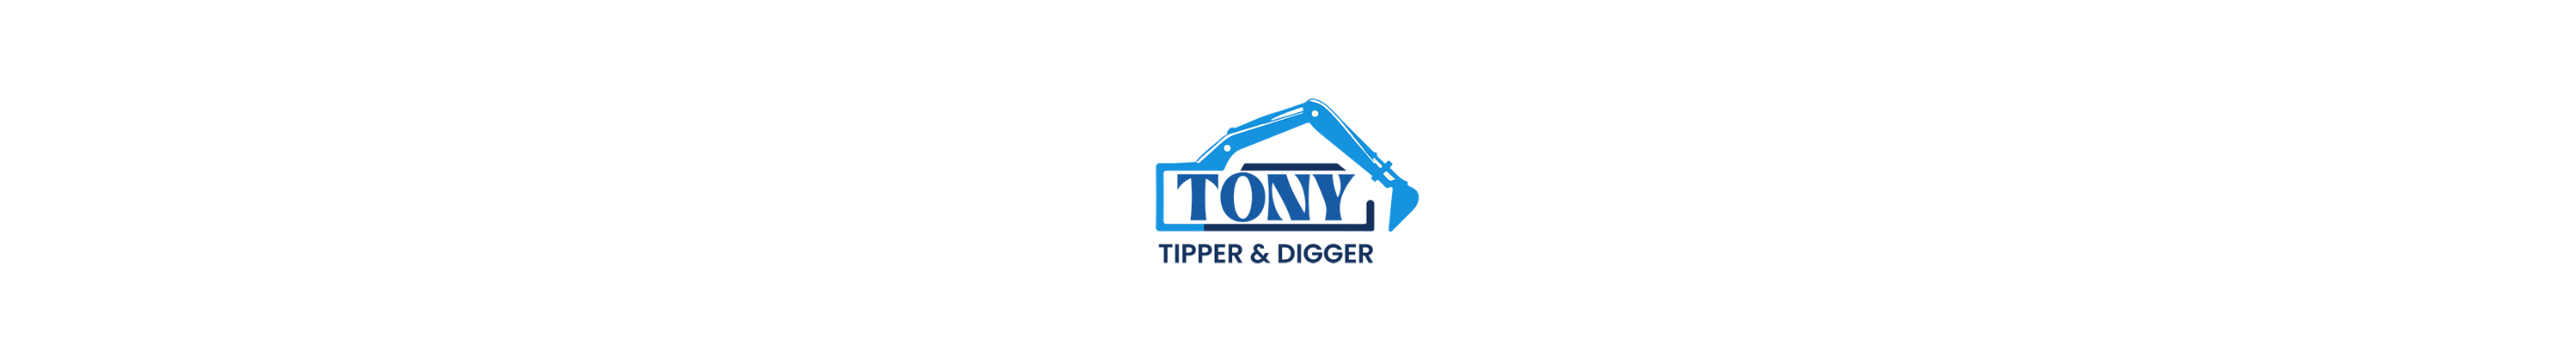 Tony & Digger Services's profile banner